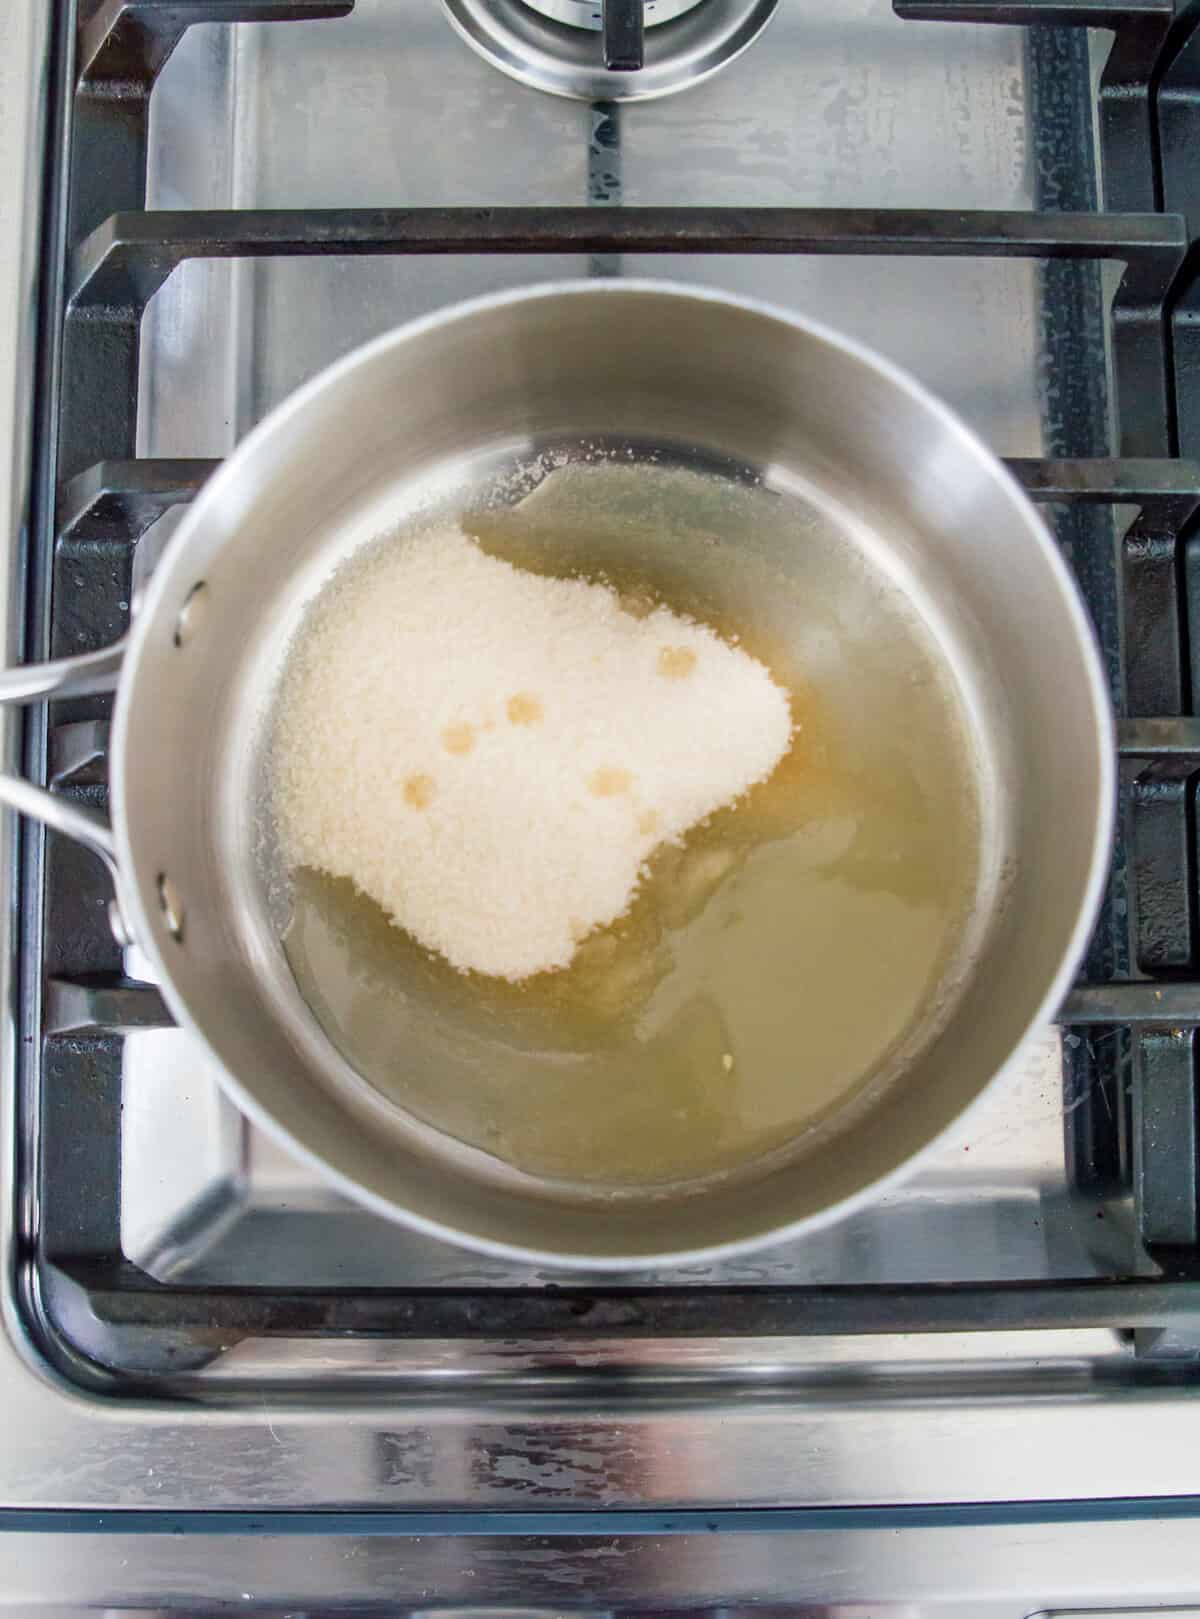 Icing sugar and lemon juice in a pot on the stovetop.